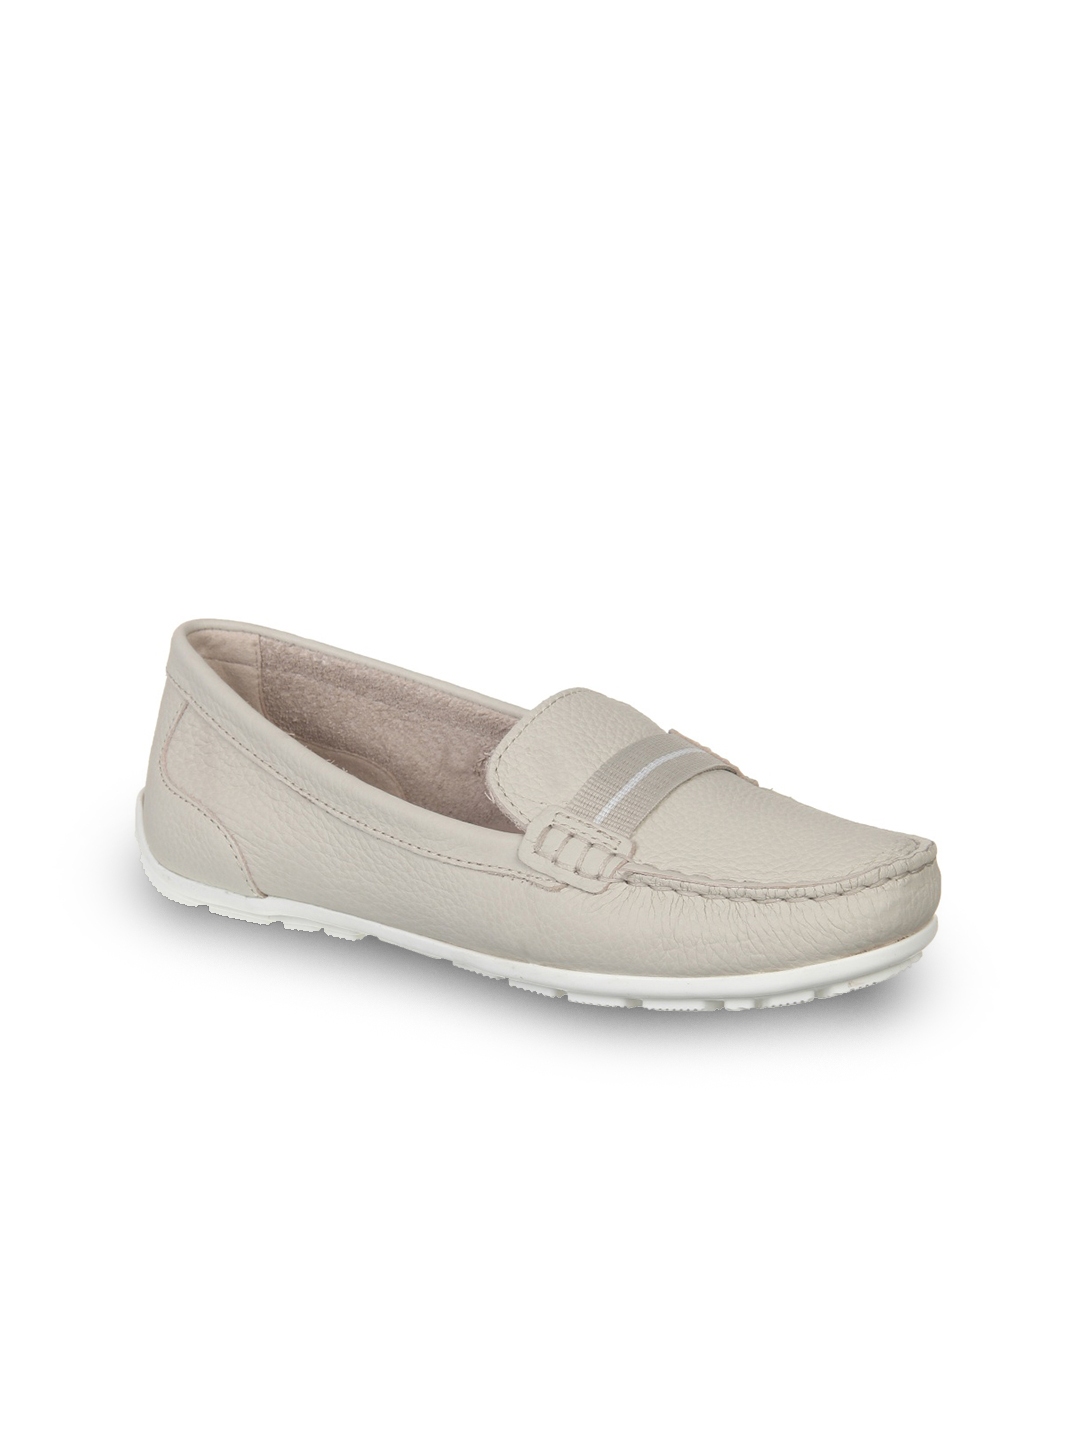 clarks women's driving moccasins